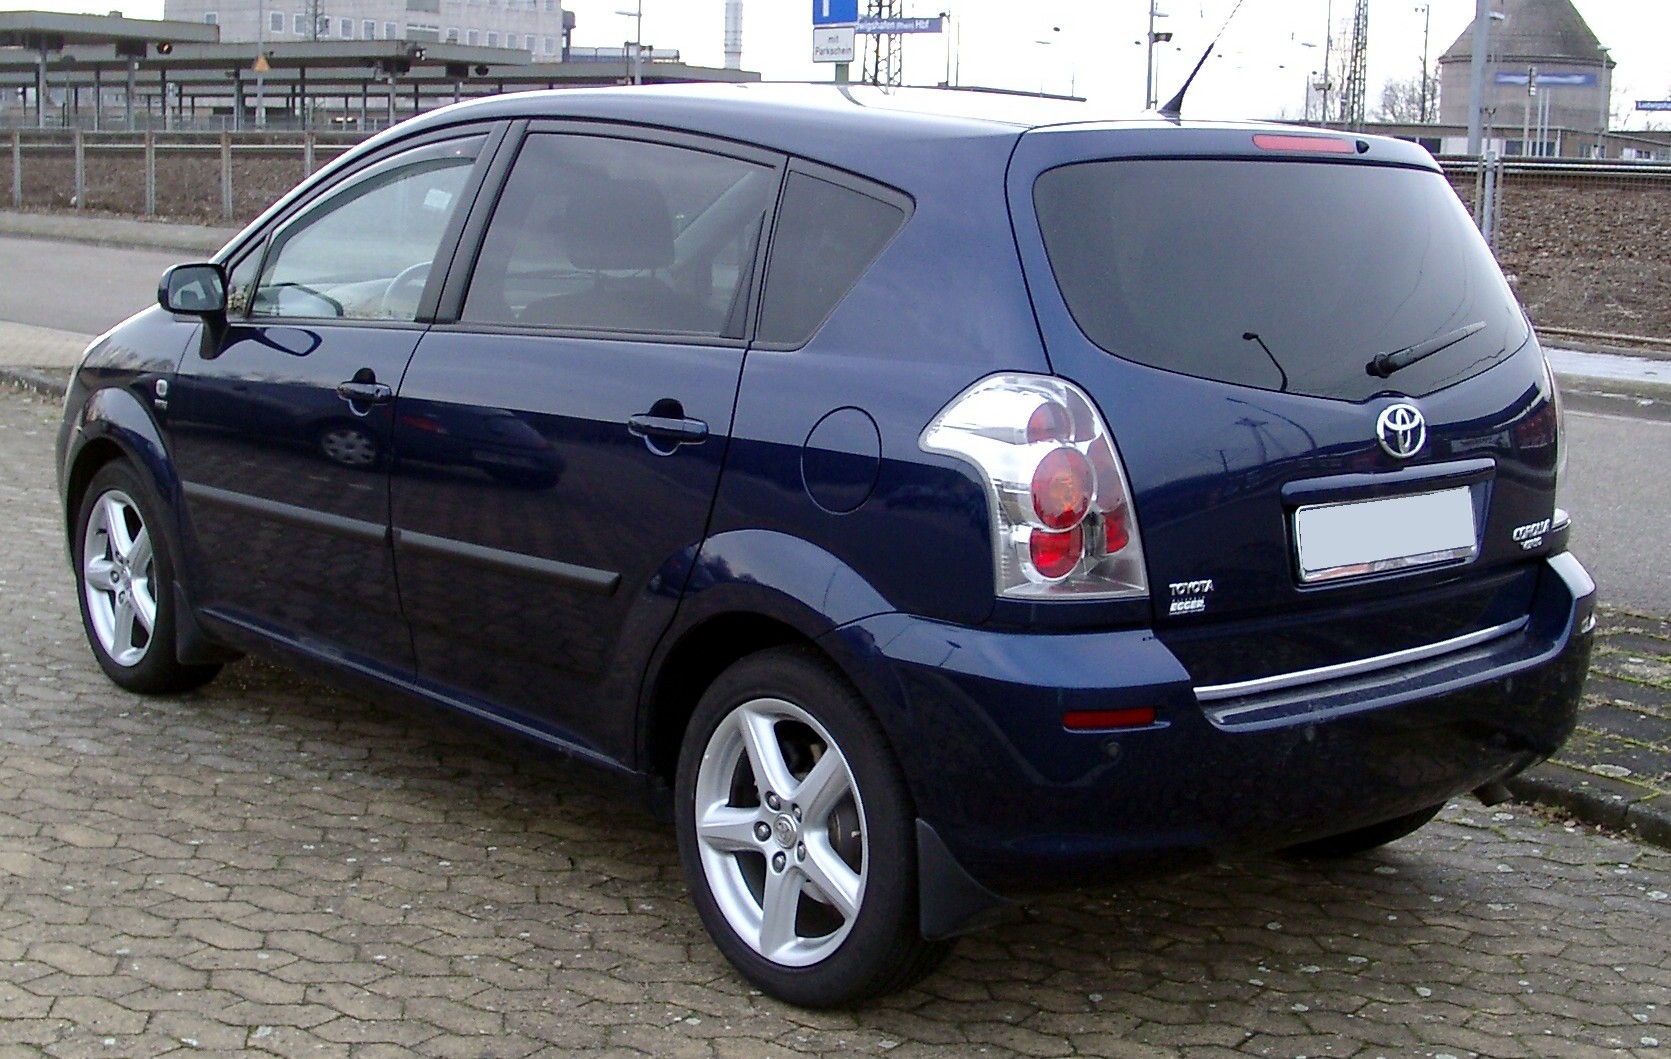 Toyota Verso 2008 Review, Amazing Pictures and Images